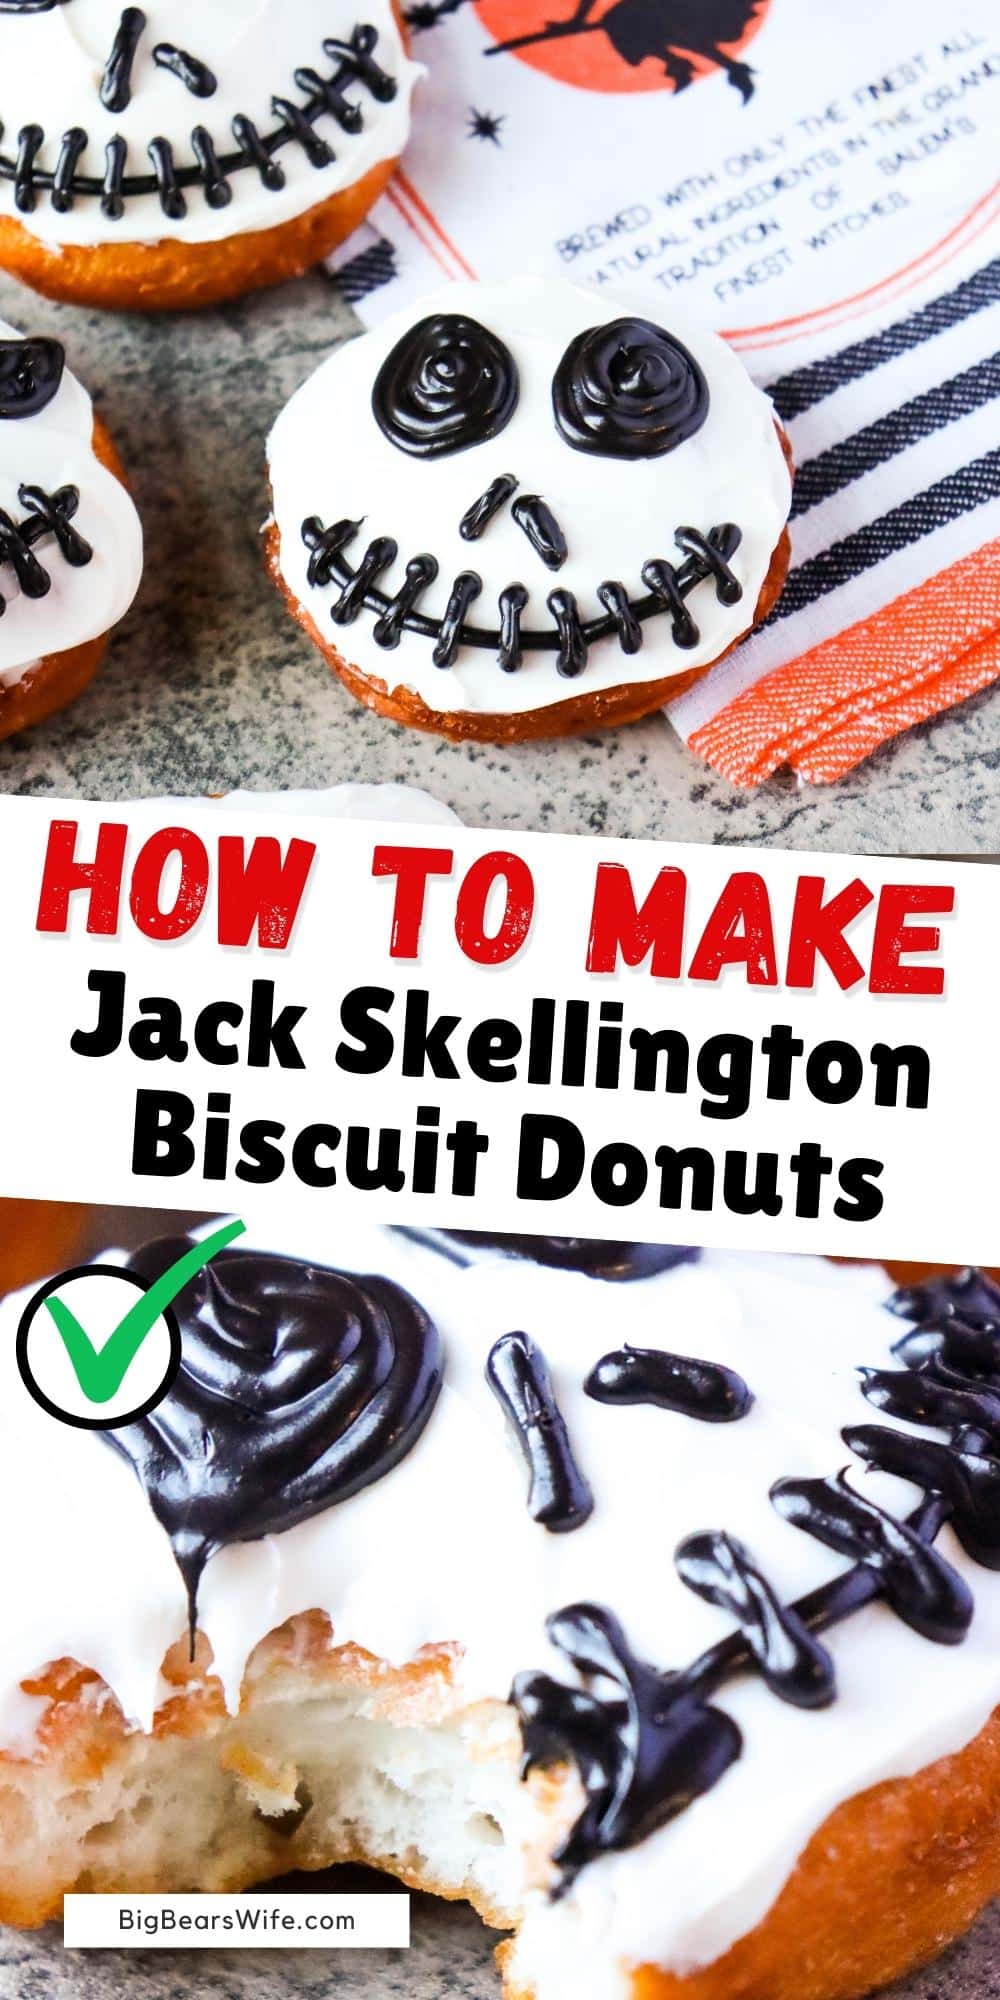 These Jack Skellington Biscuit Donuts are made with canned biscuits and fried until golden brown, before being decorated to look like Disney's Jack Skellington with frosting. via @bigbearswife